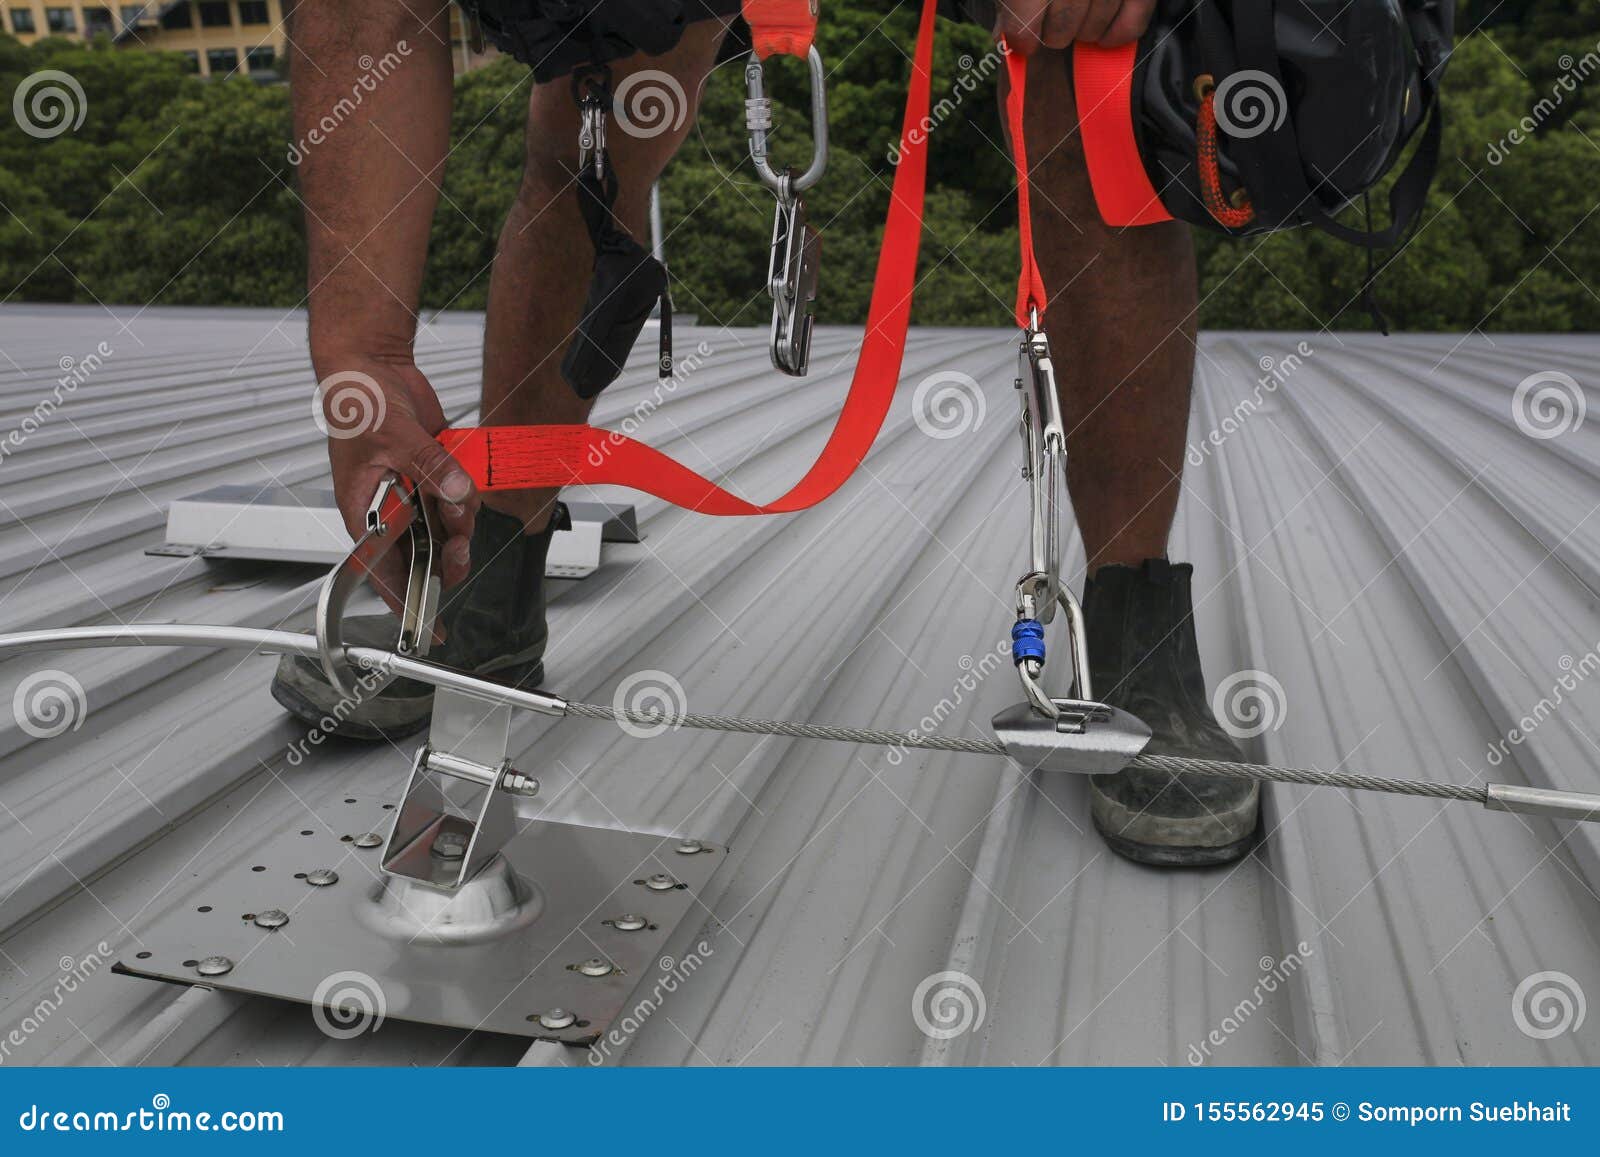 trained worker clipping stainless industrial locking hook into fall arrest roof anchor point systems